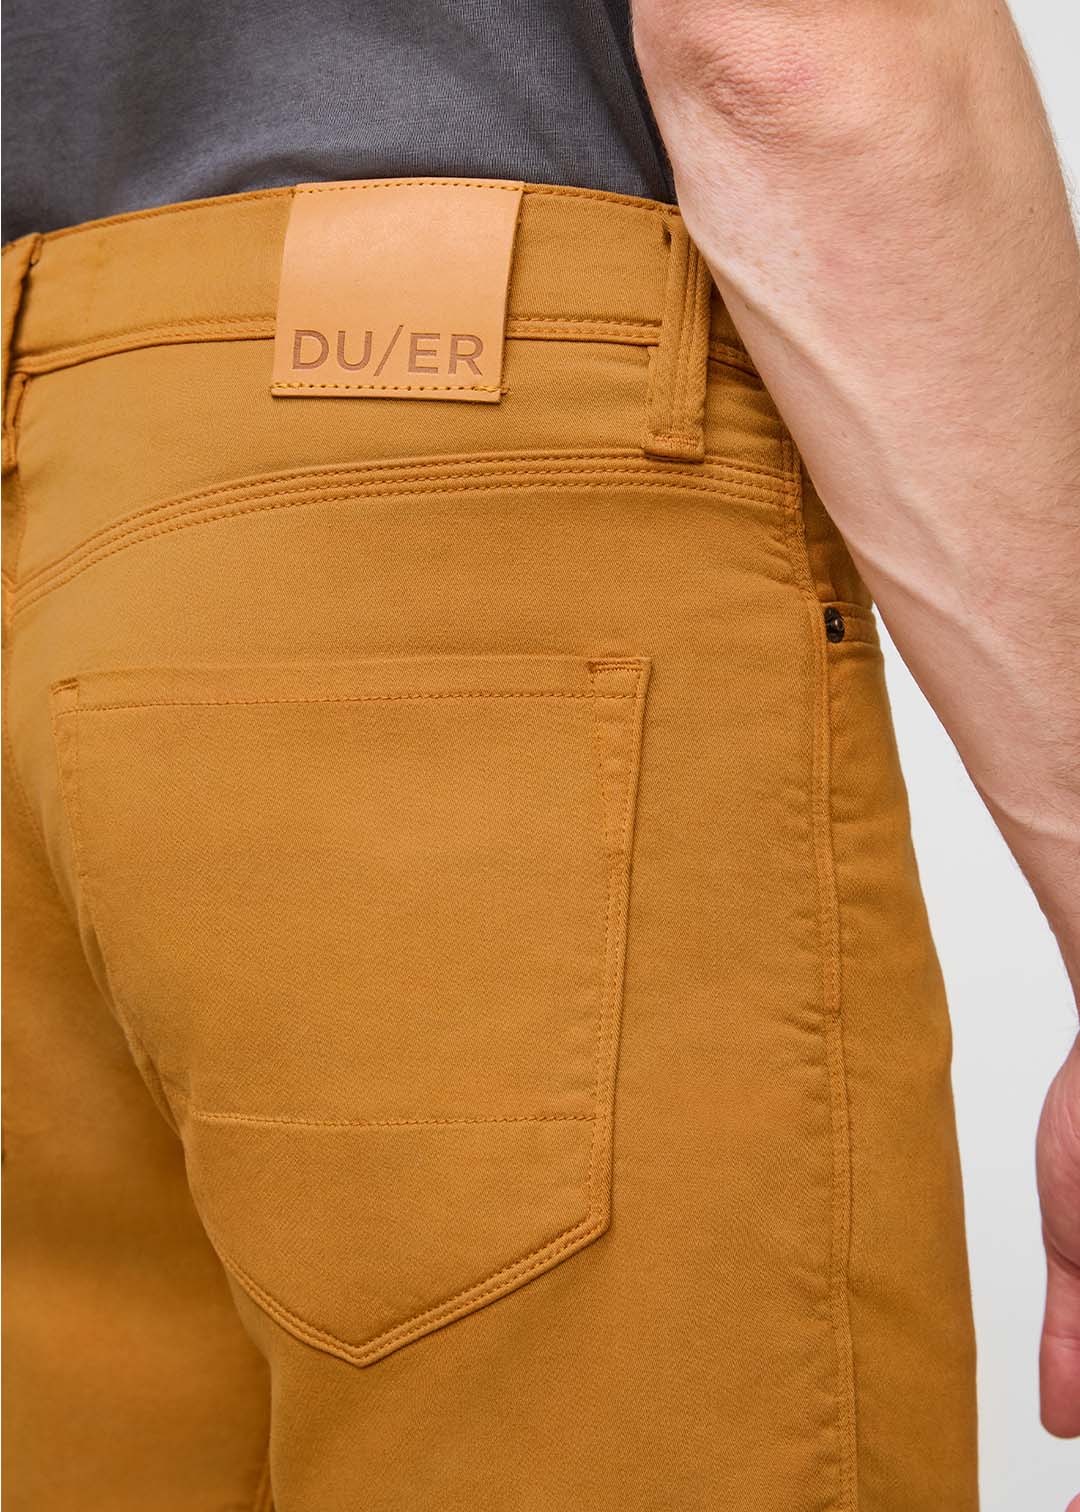 mens yellow slim fit performance short back pocket and patch detail